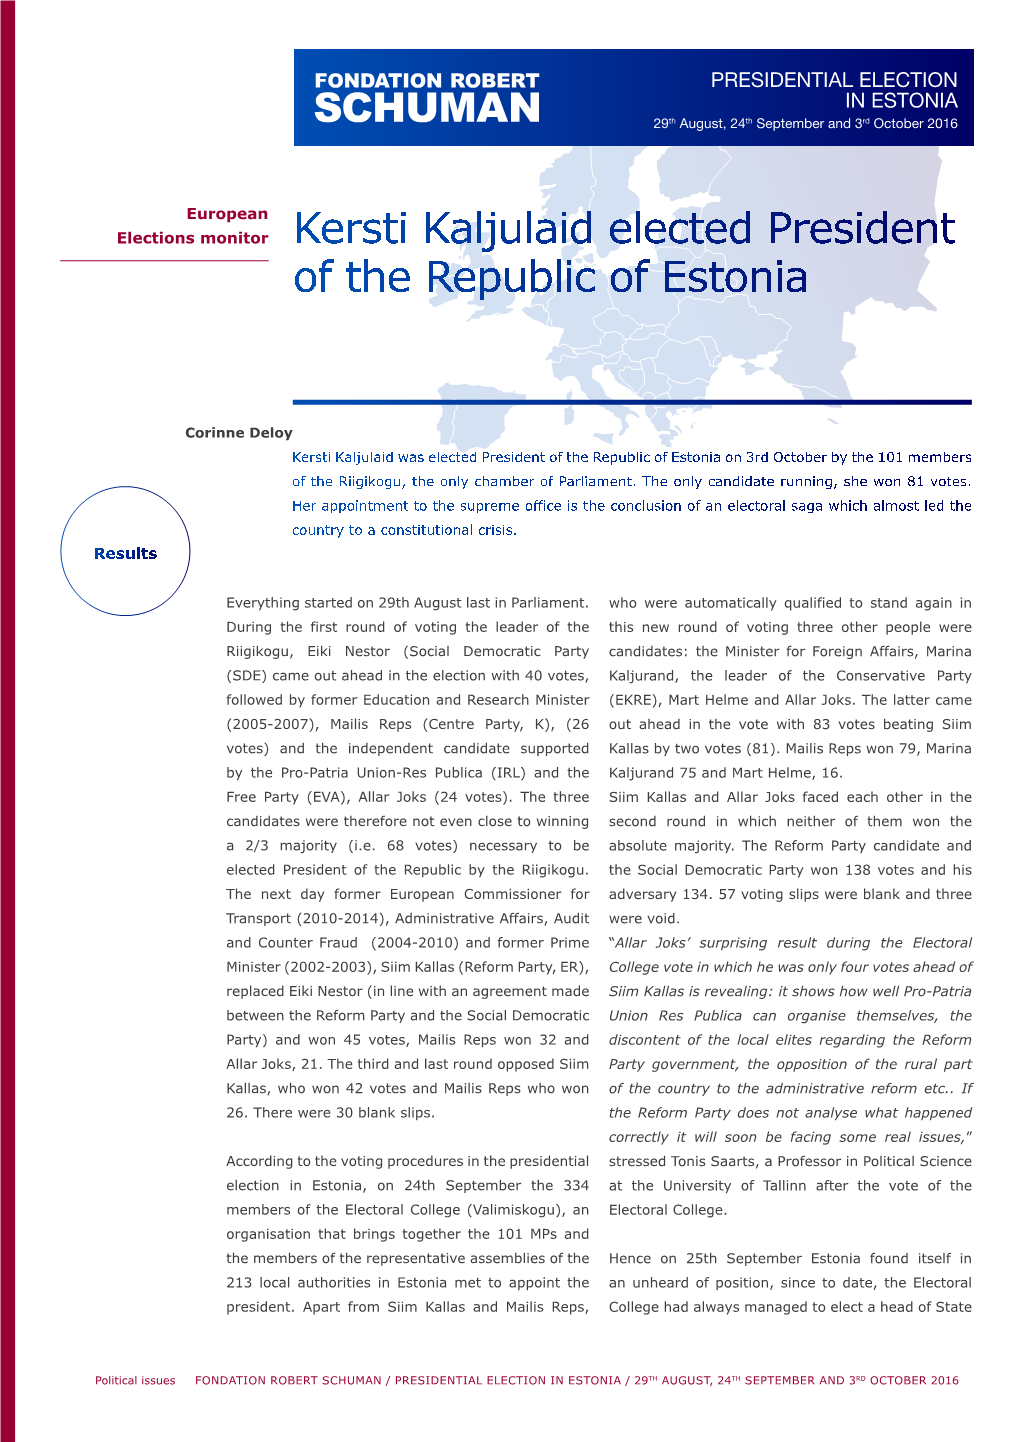 PRESIDENTIAL ELECTION in ESTONIA 29Th August, 24Th September and 3Rd October 2016